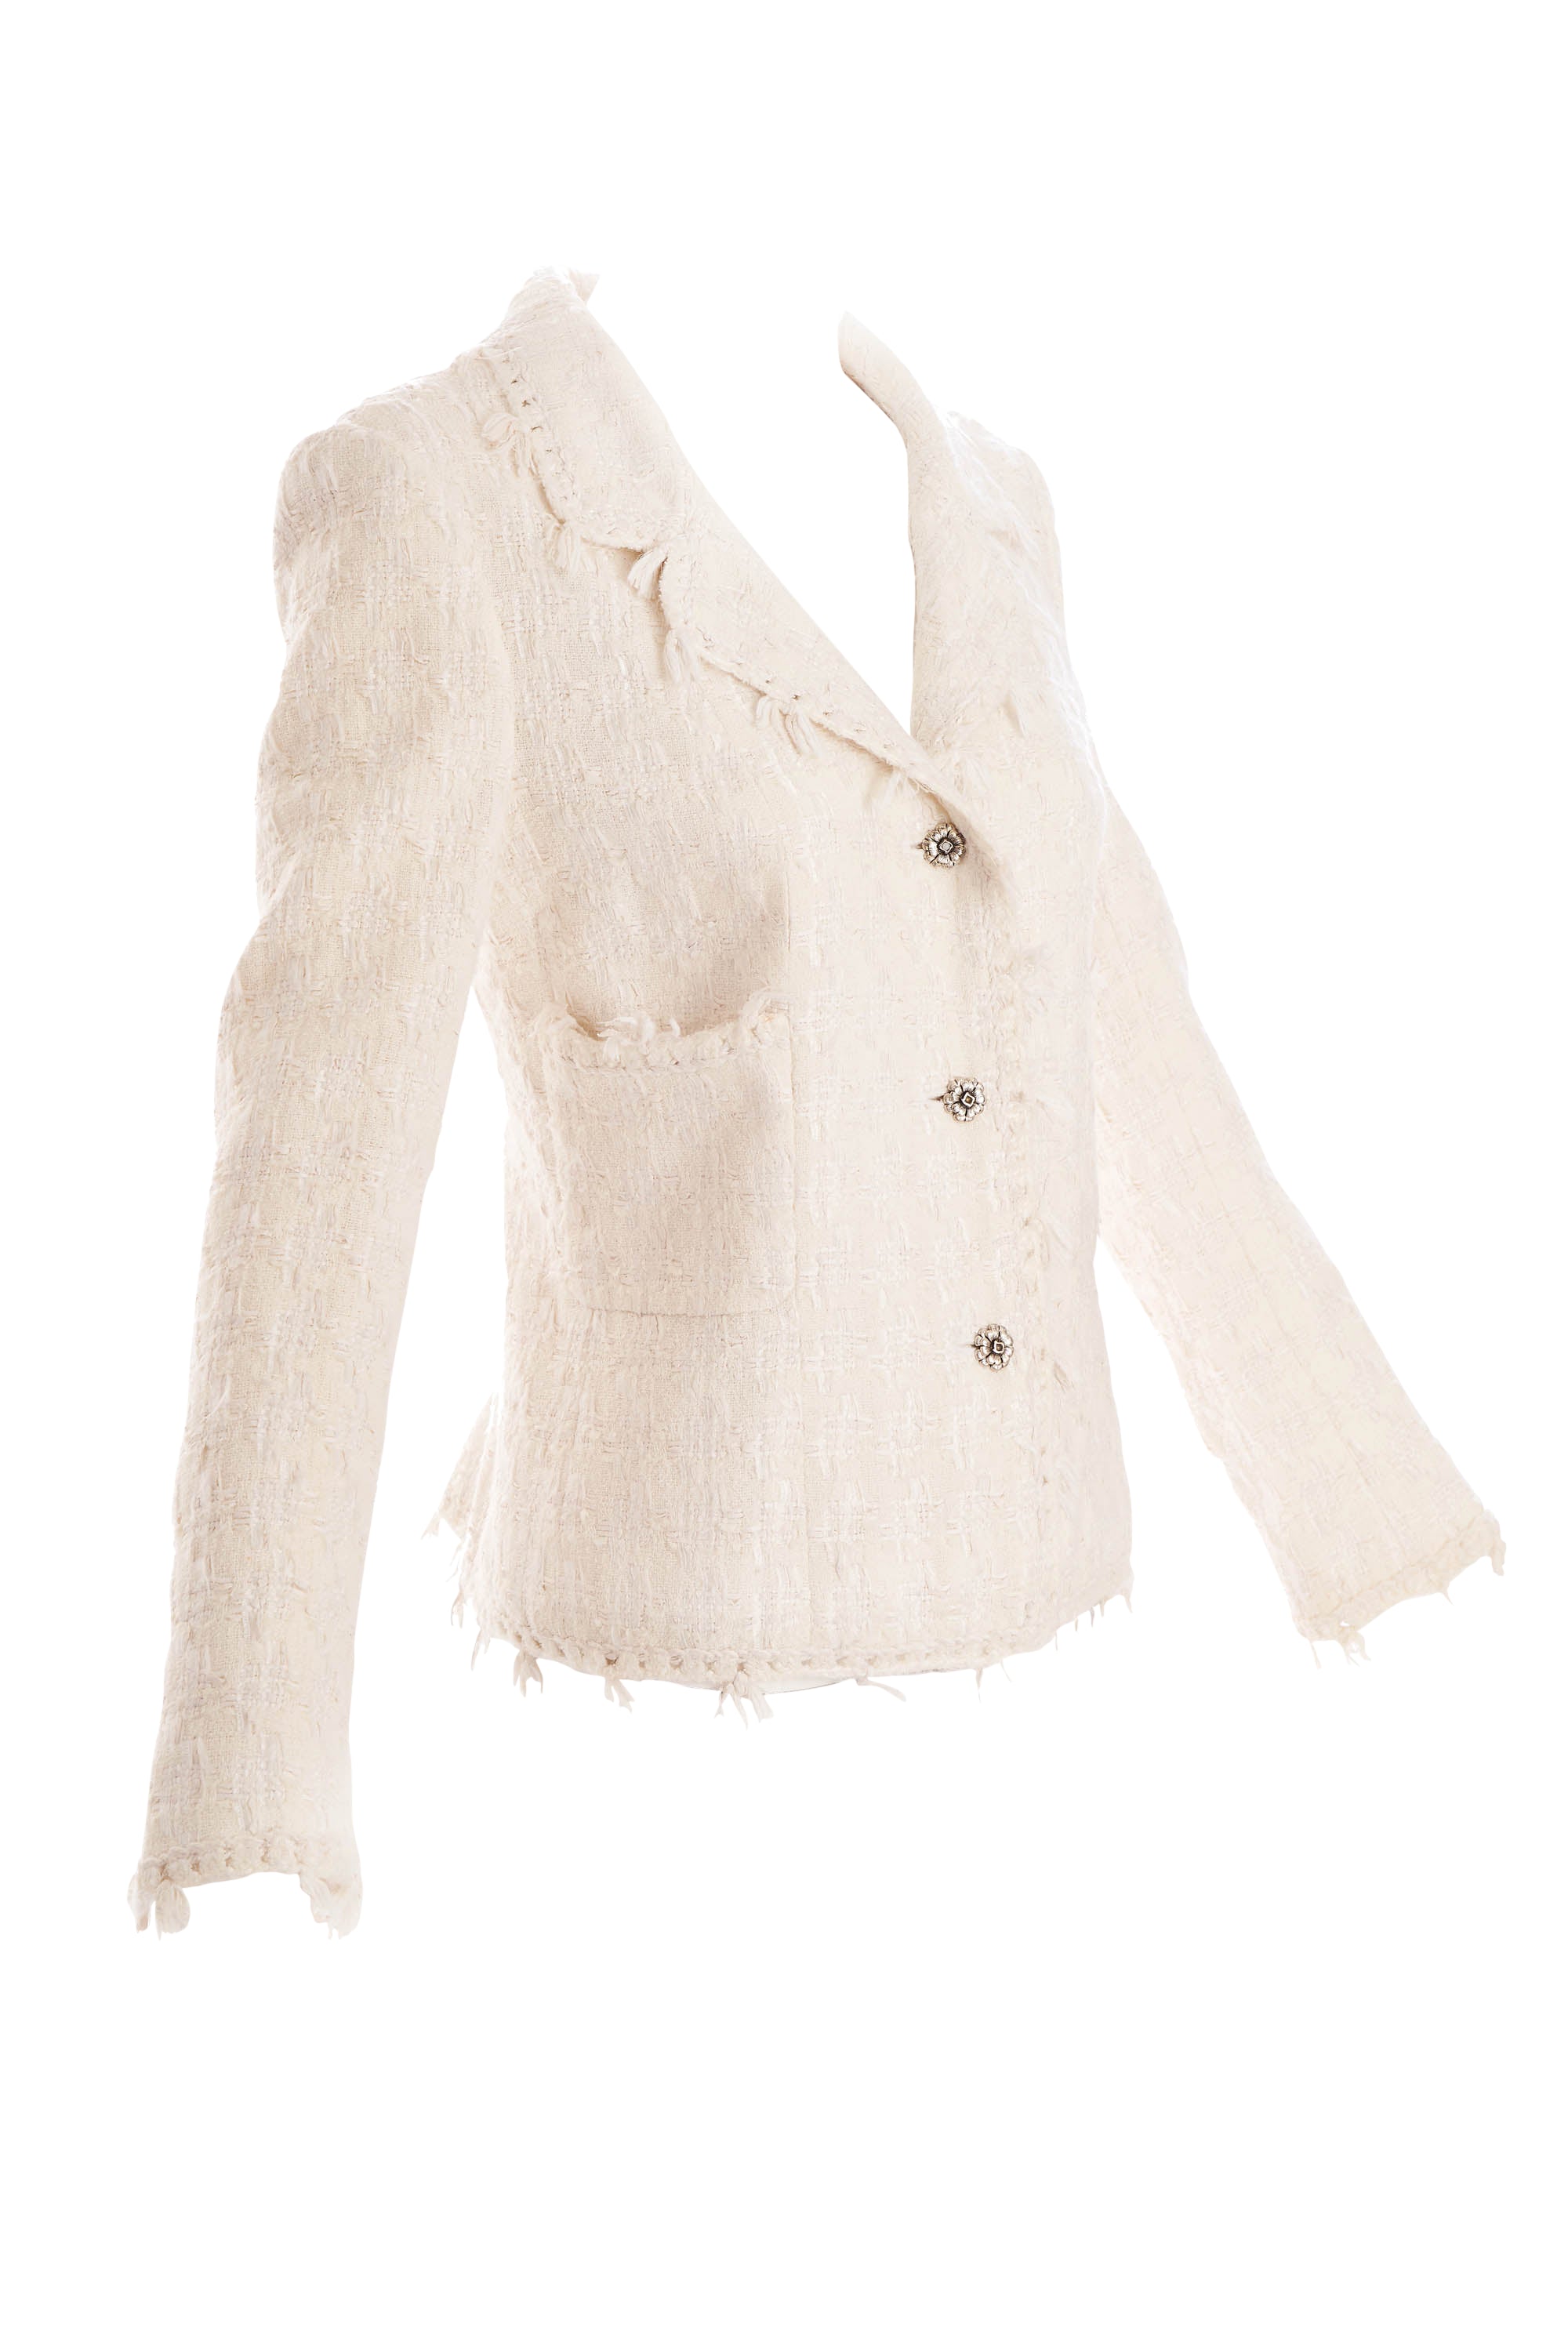 Chanel White Fantasy Tweed Jacket Silver CC Buttons 2005C Size 42